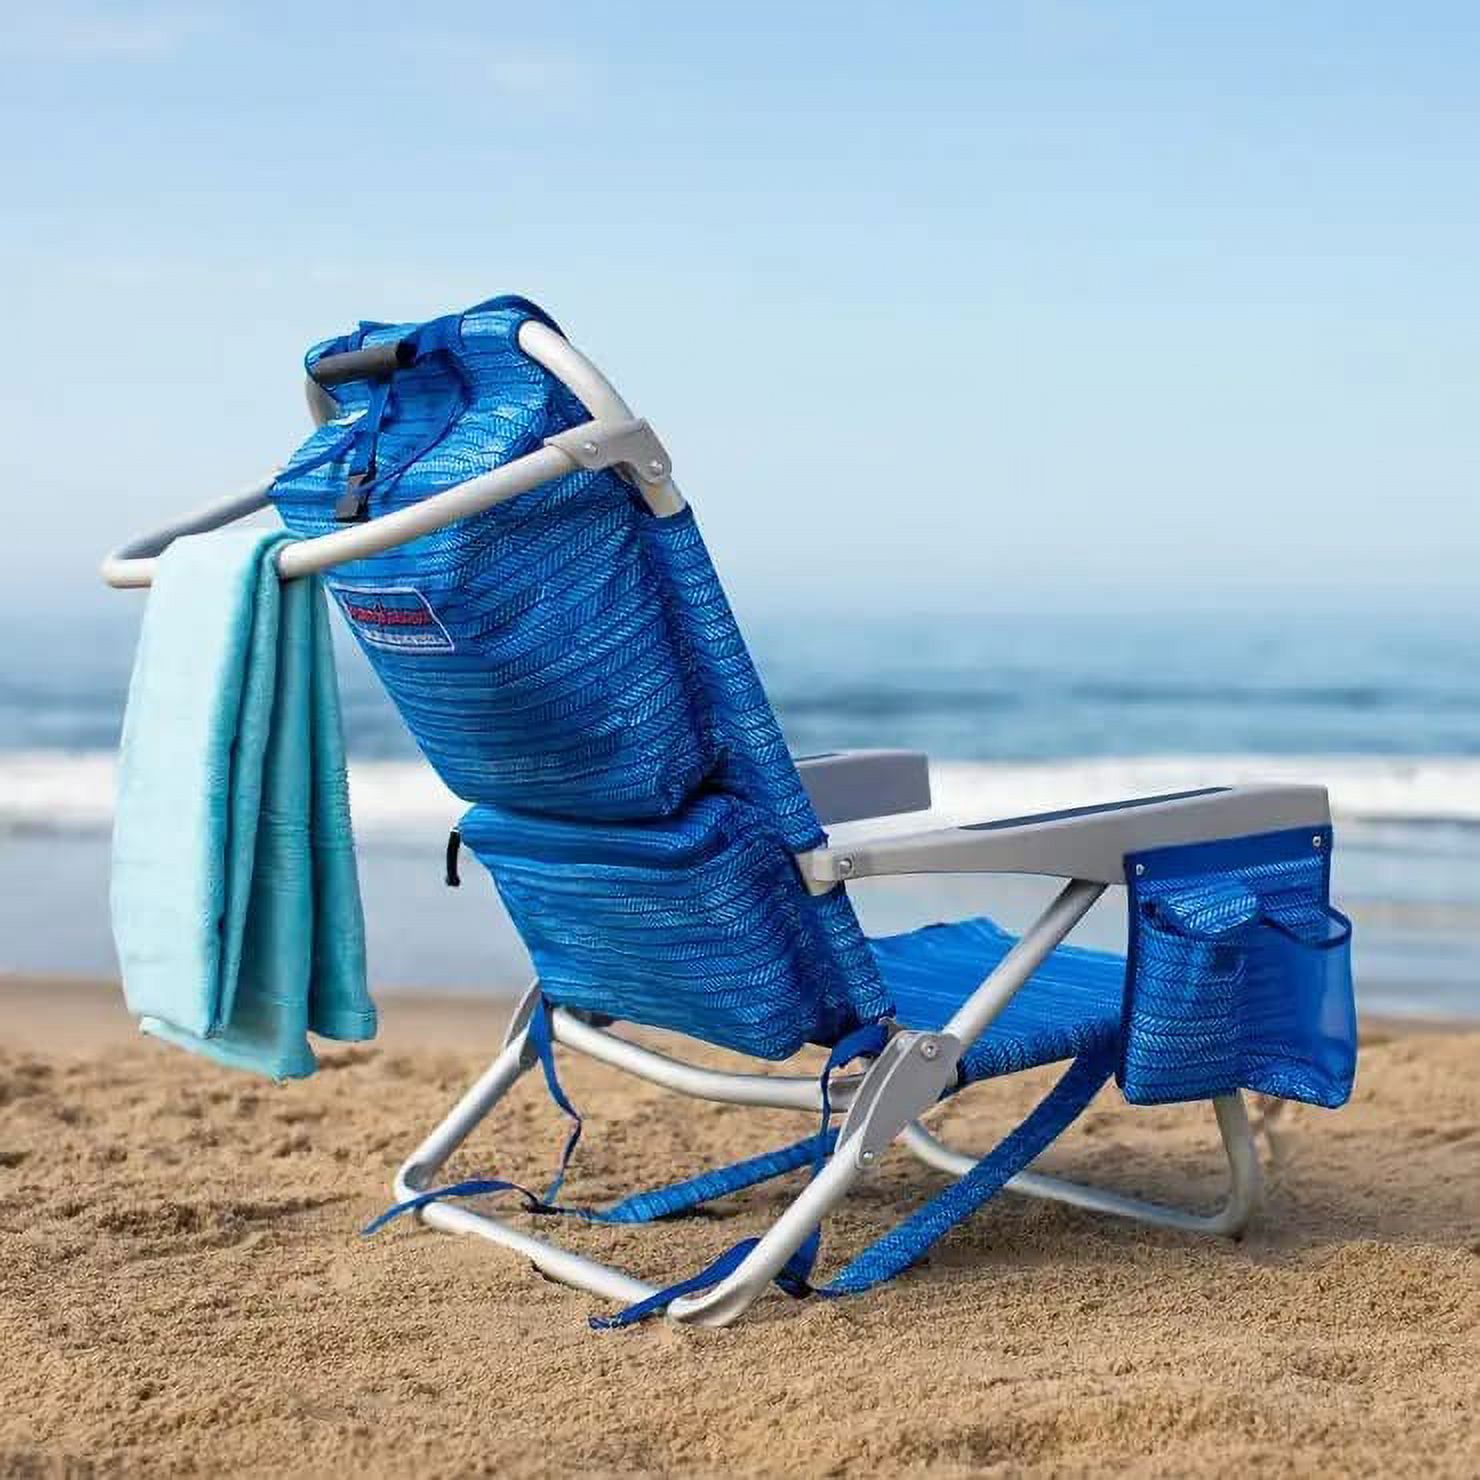 Tommy Bahama 5 Position Sailfish and Palms Backpack Beach Chair - image 3 of 4